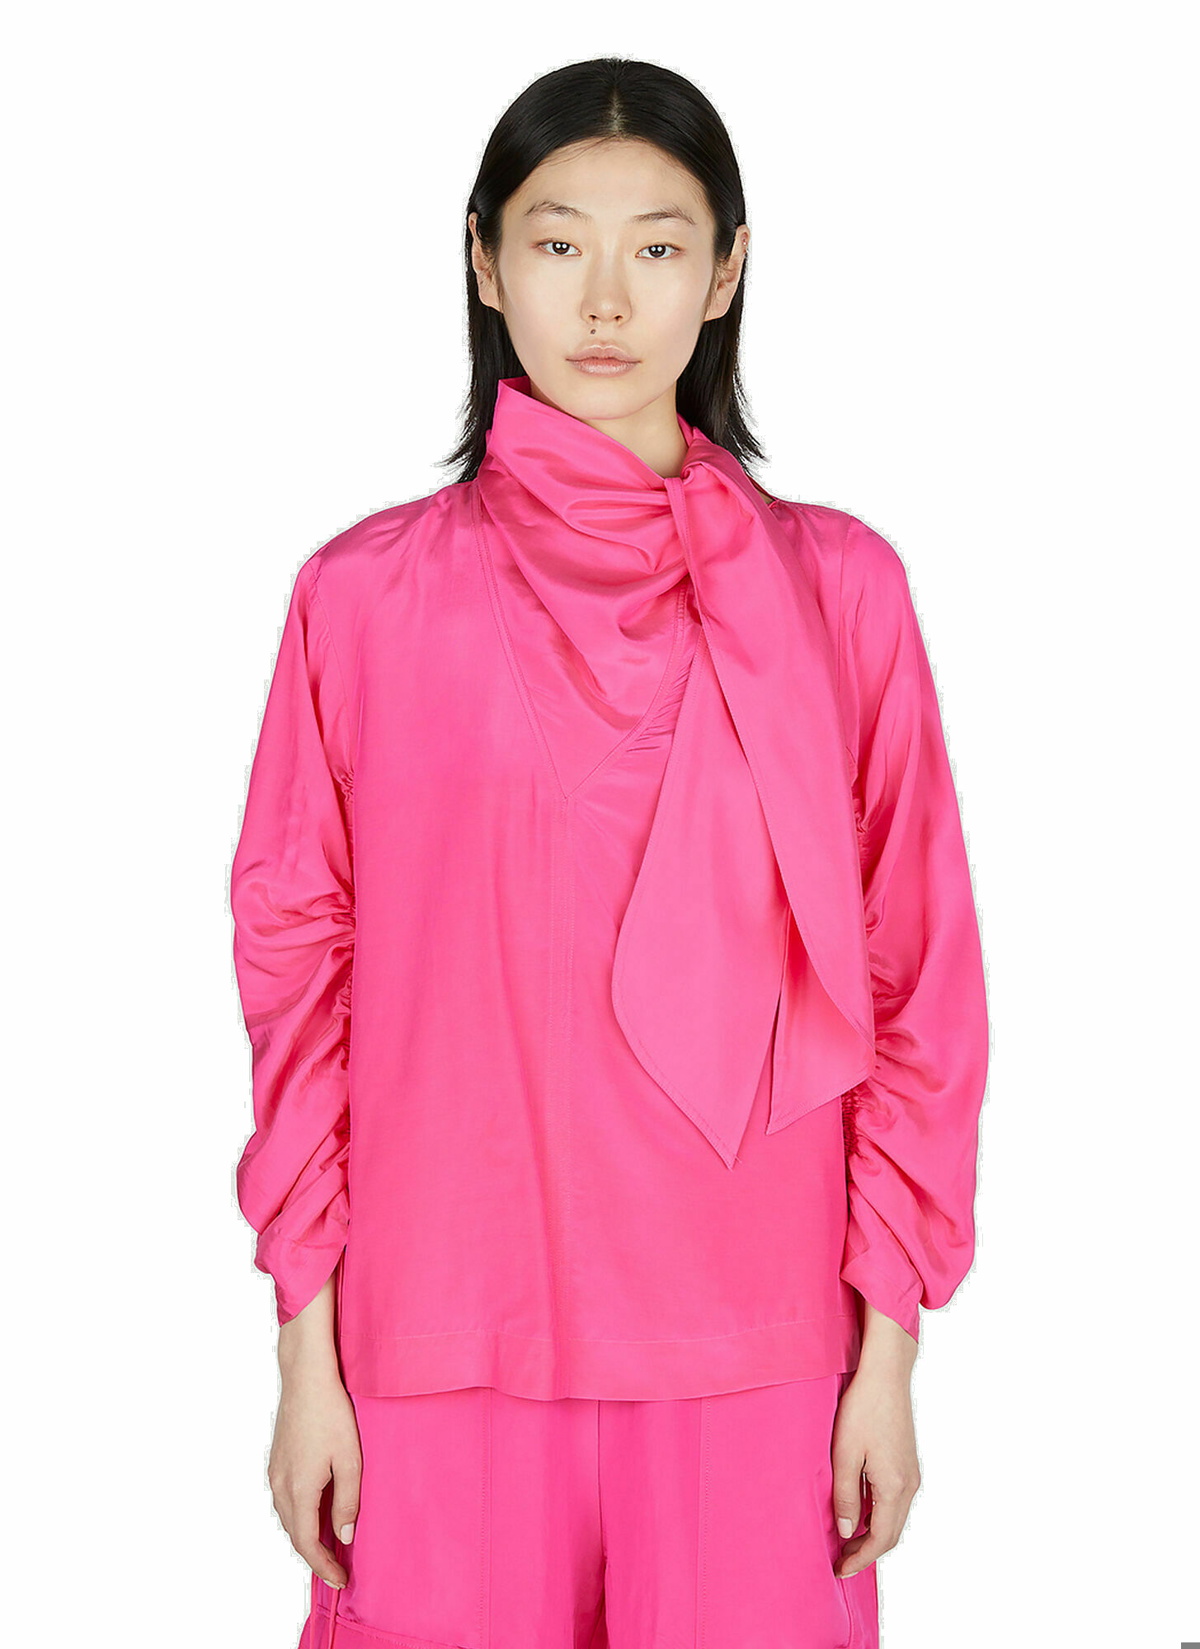 Rodebjer - Mona Drapy Blouse in Pink Rodebjer